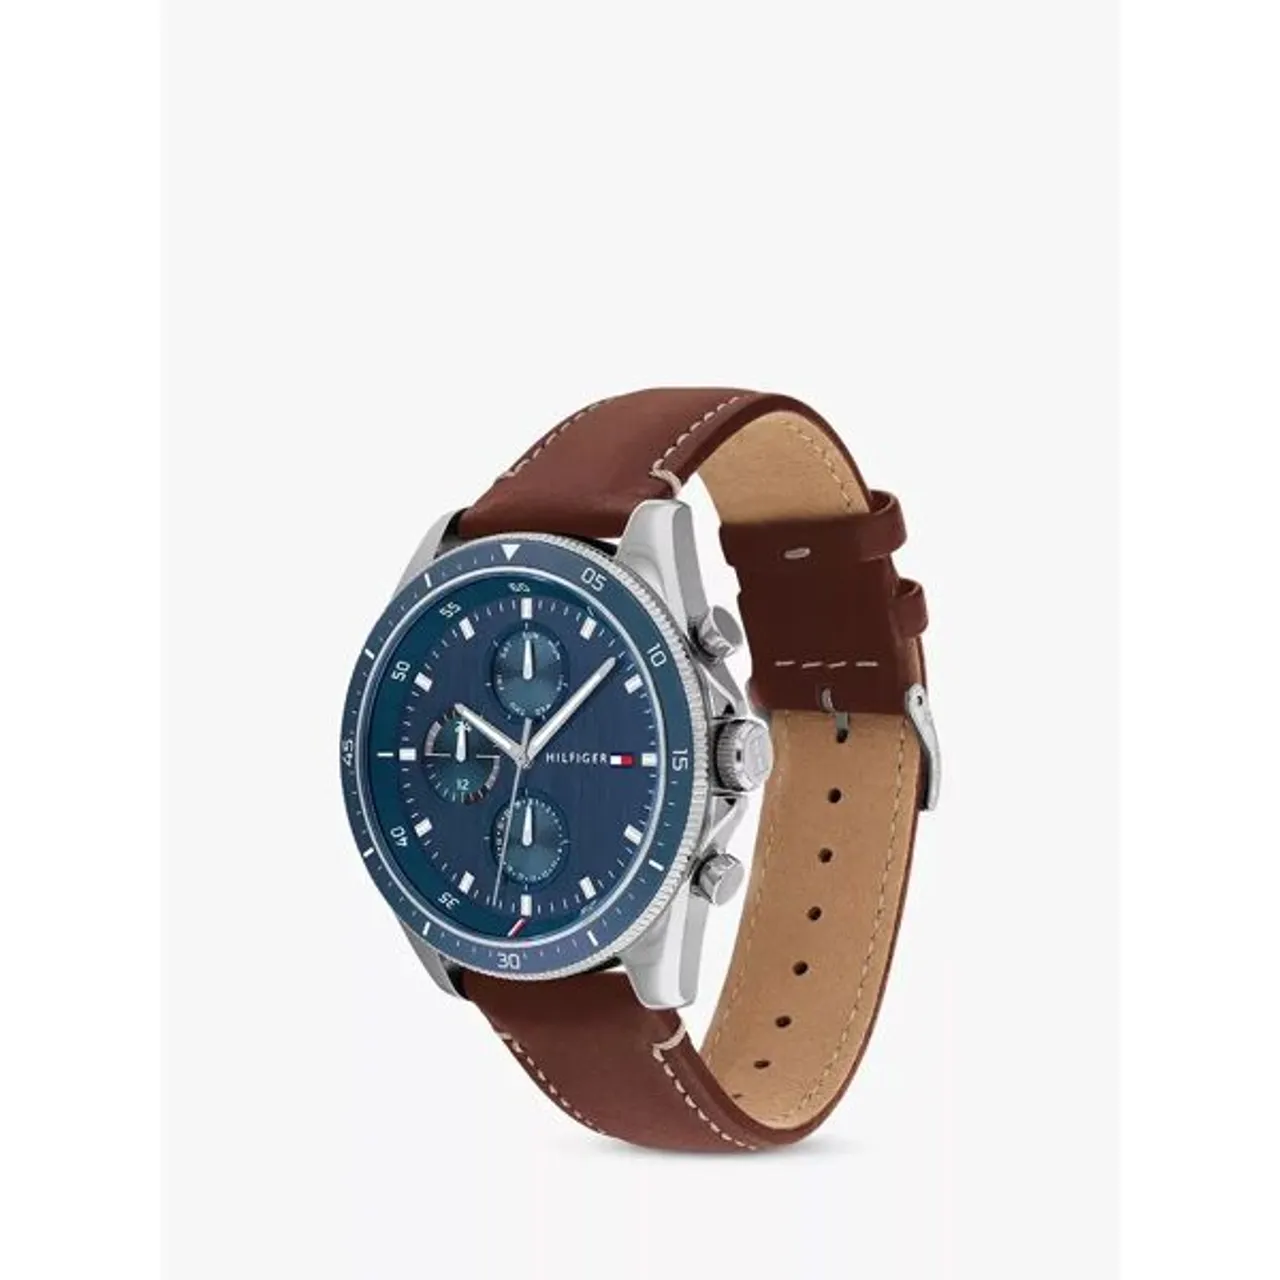 Tommy Hilfiger Men's Chronograph Leather Strap Watch - Brown/Blue 1791837 - Male